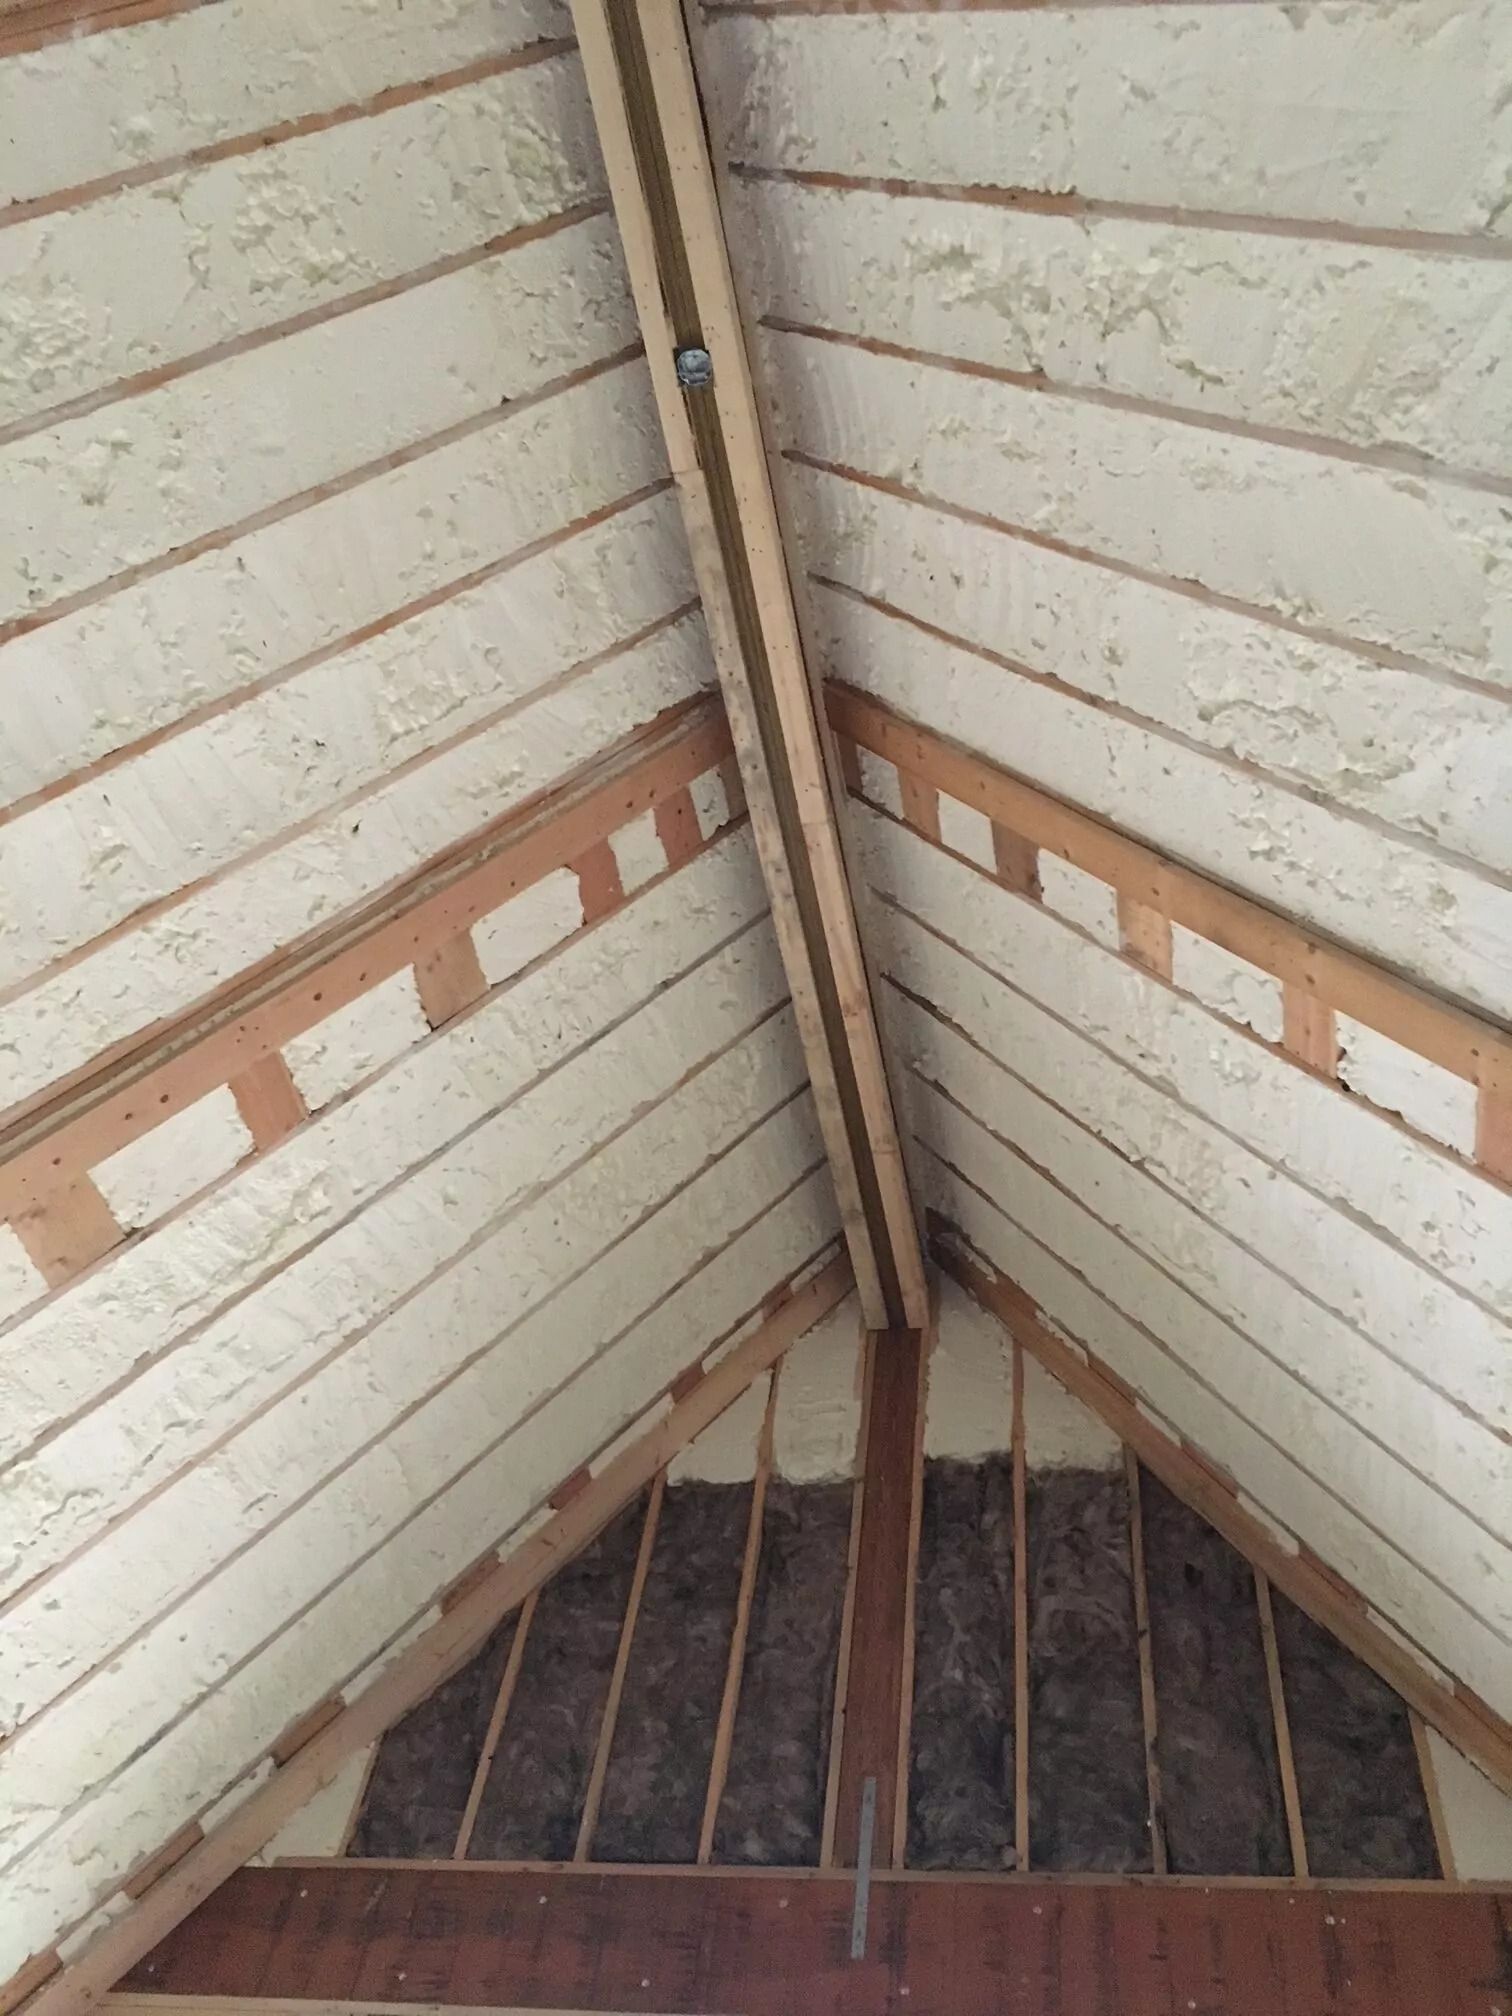 Spray foam insulation in the ceiling of a peaked attic.